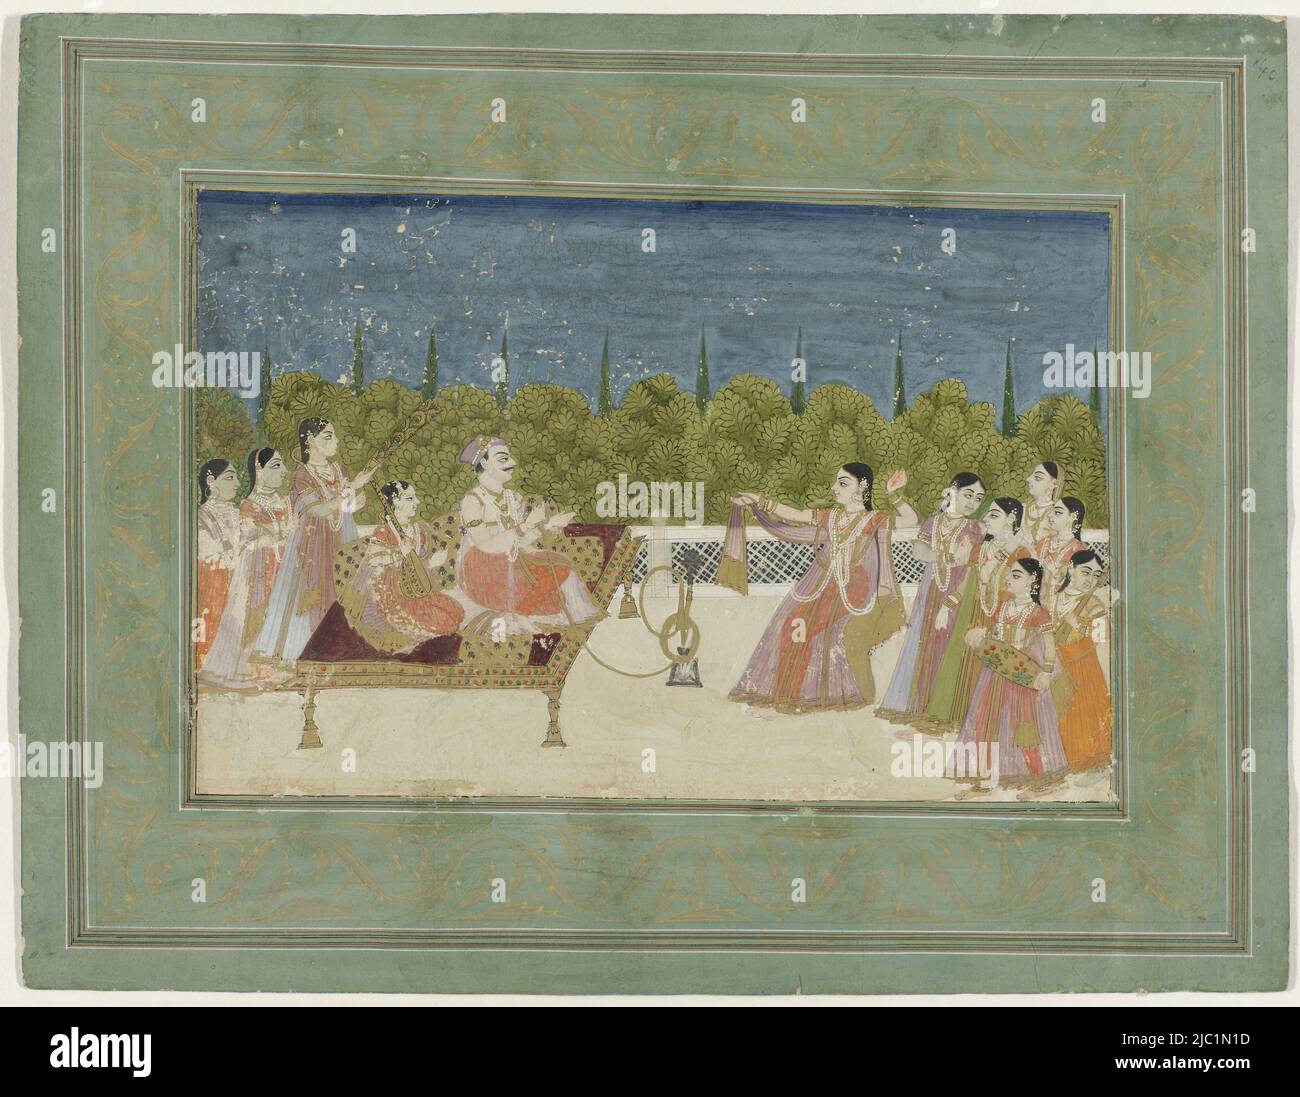 On a golden tabouret on a white terrace sits a royal couple on the left, the man holds the snake of the hookah, the woman behind him a tampoera, on the left behind the tabouret three servants, on the right in front of the tabouret a dancing woman with behind her a group of women, some of them holding a musical instrument, behind the terrrass bushes and cypresses. The representation is in frame lines of black, red and white, a golden piping around the inner edge, the outer edge of the leaf is in sky blue with foliage in gold, the vertical edges as wide as horizontal, around the painted edge Stock Photo